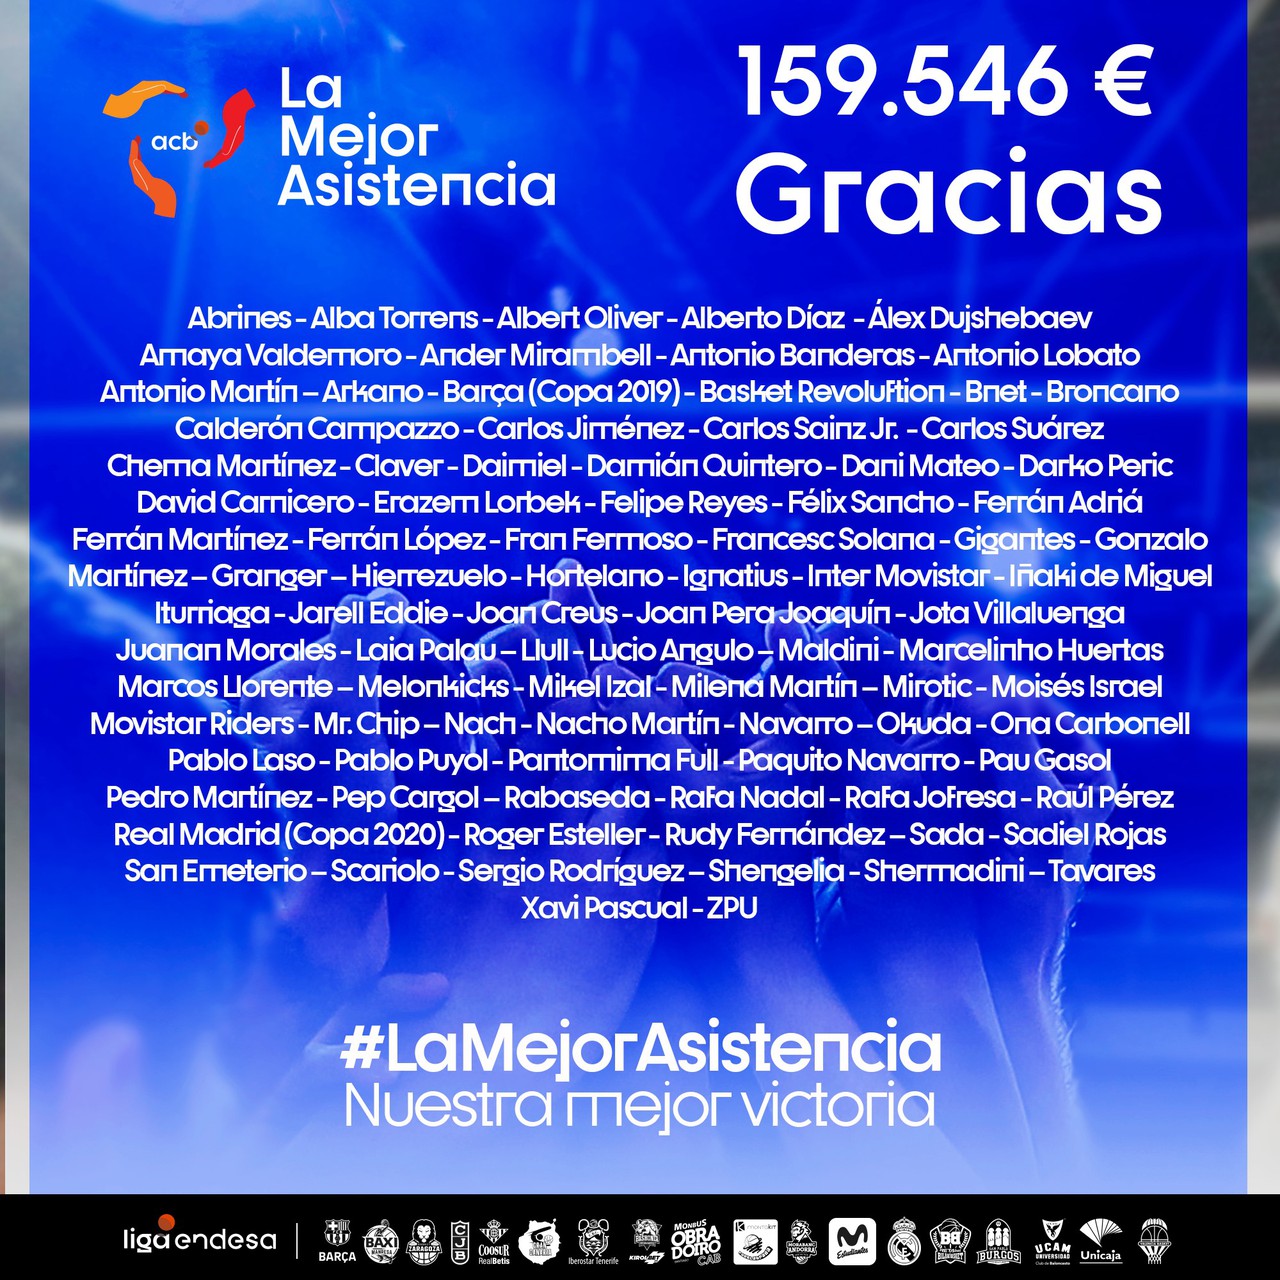 Together we have given #LaMejorAsistencia: 159,546 euros to alleviate the effects of the coronavirus